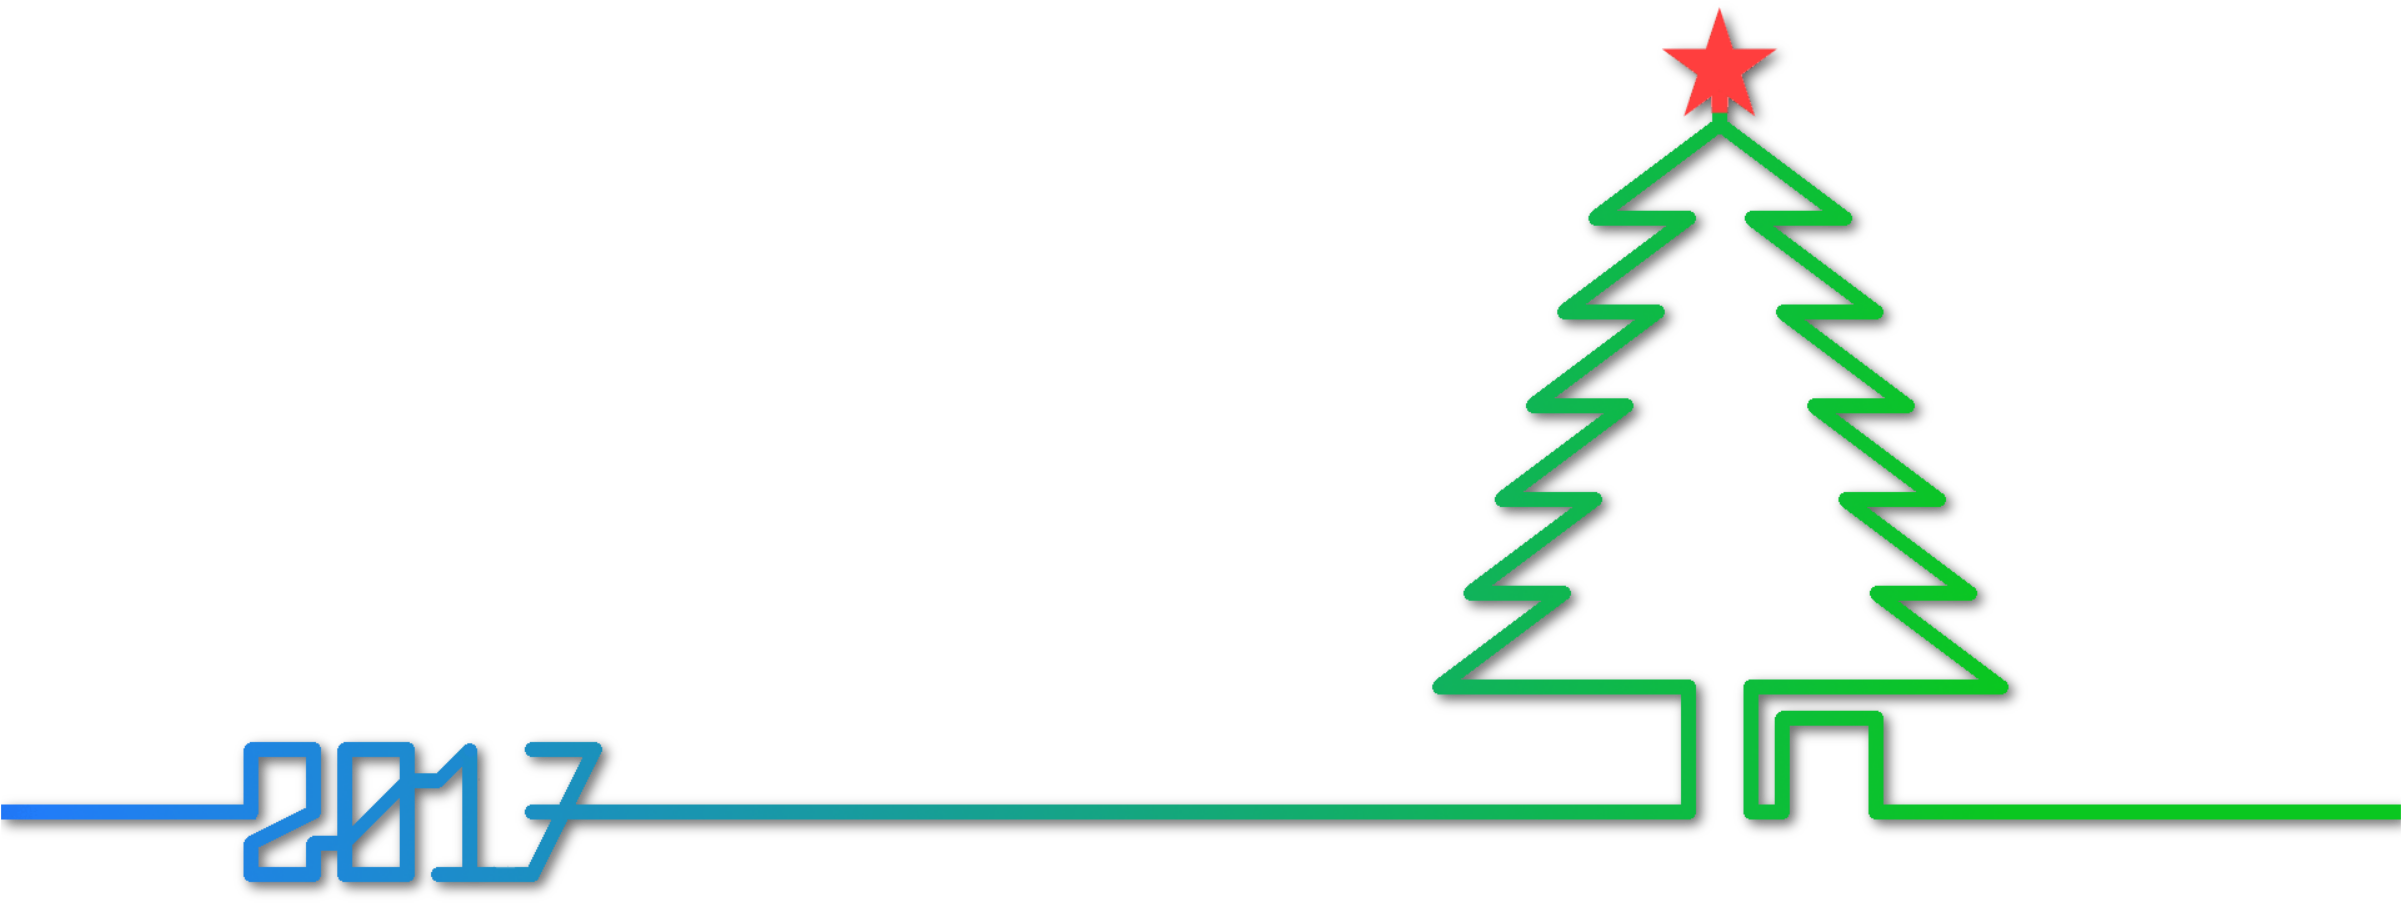 This Free Icons Png Design Of 2017 Christmas Tree Clipart (2400x1350), Png Download